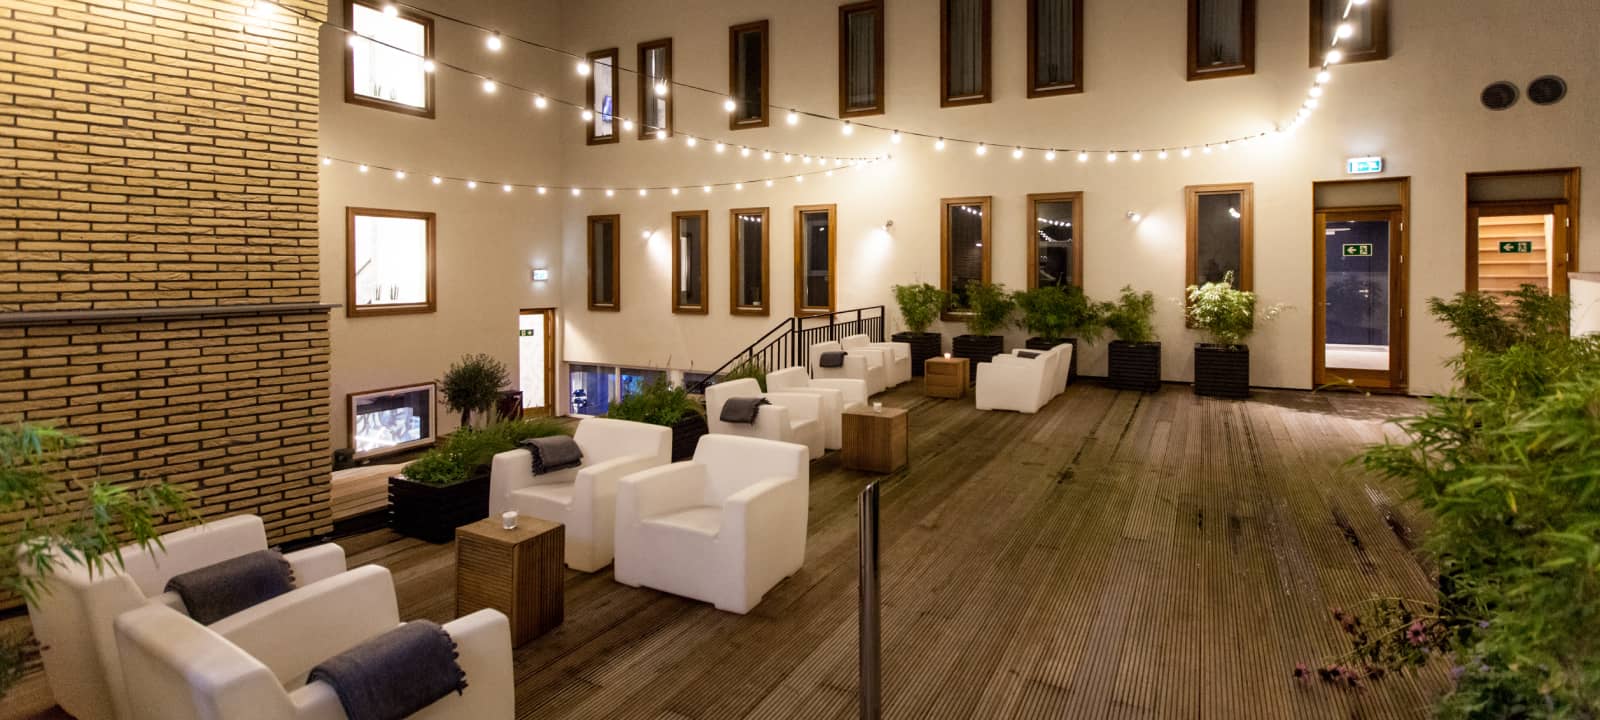 Internal patio of building with wooden terrace, white benches and plant decoration | Kaboom Hotel